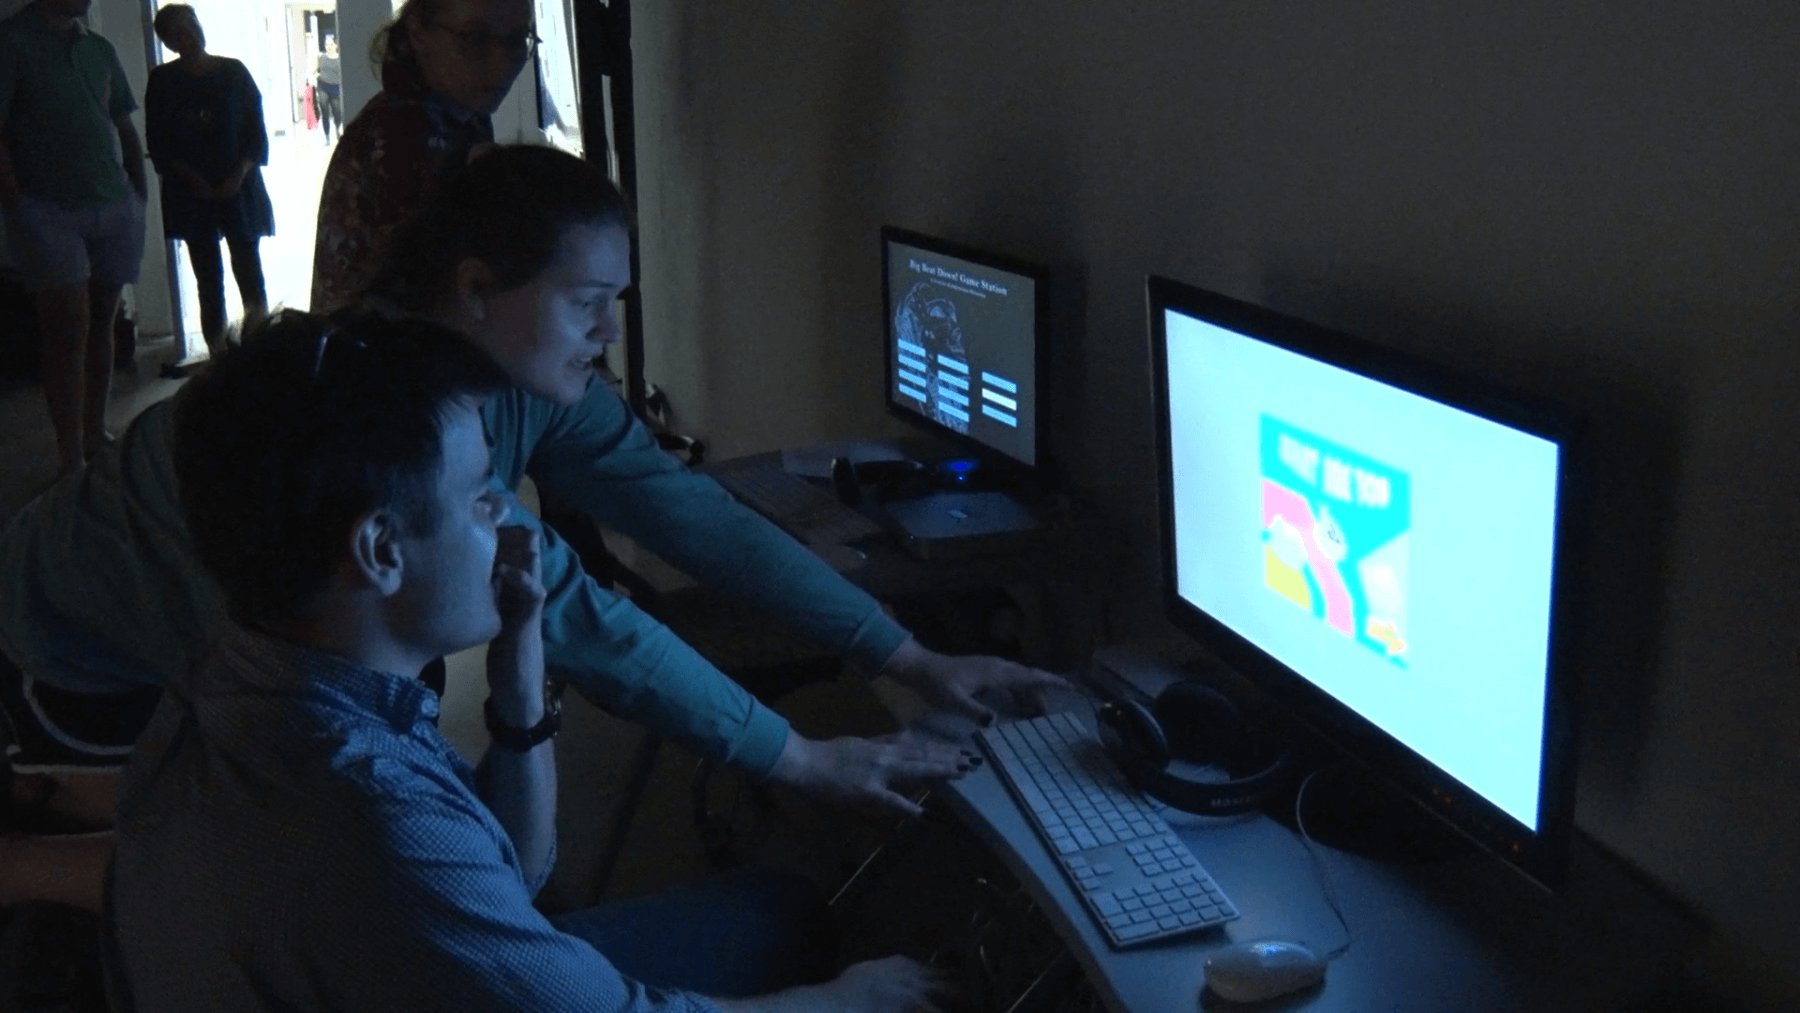 students work on a computer in a dark room